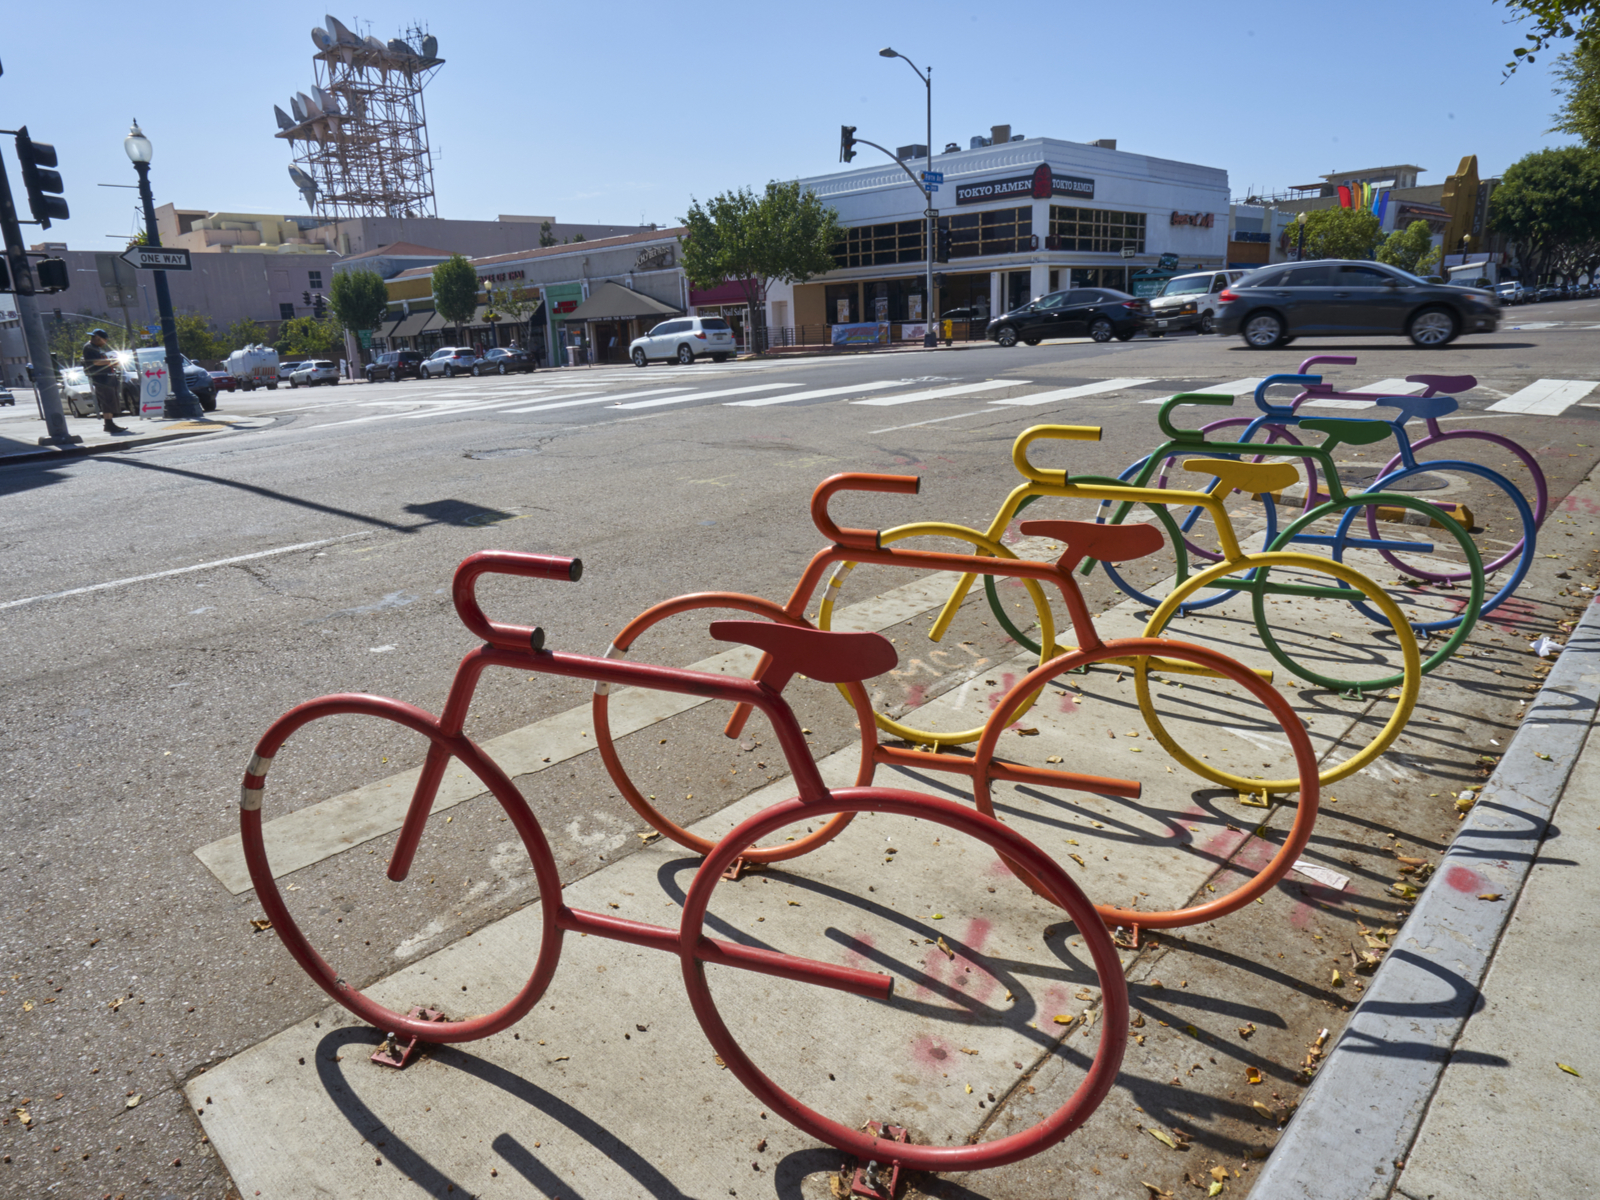 Bikes in the Hillcrest District, one of the best areas to stay in San Diego